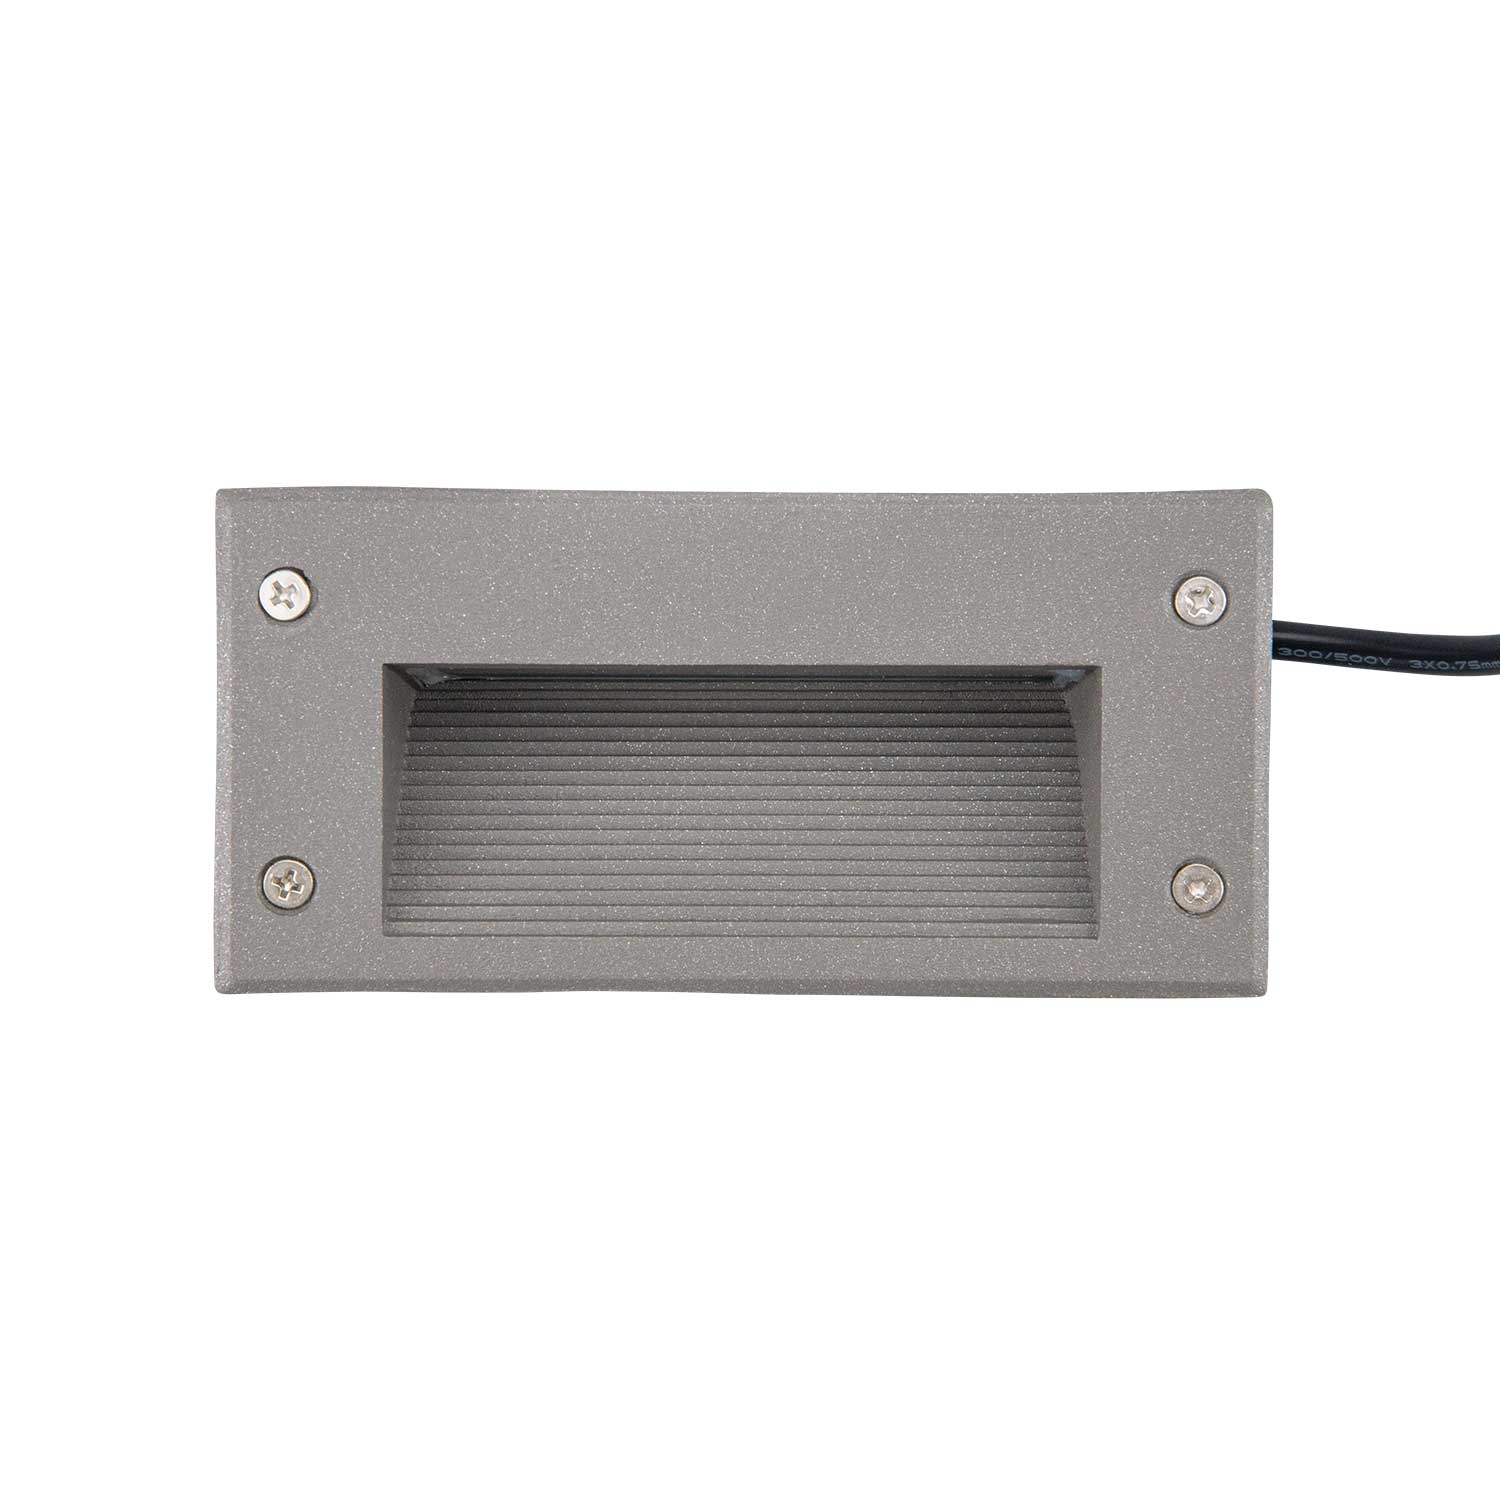 Baliza 2W LED empotrable 4000K exterior gris